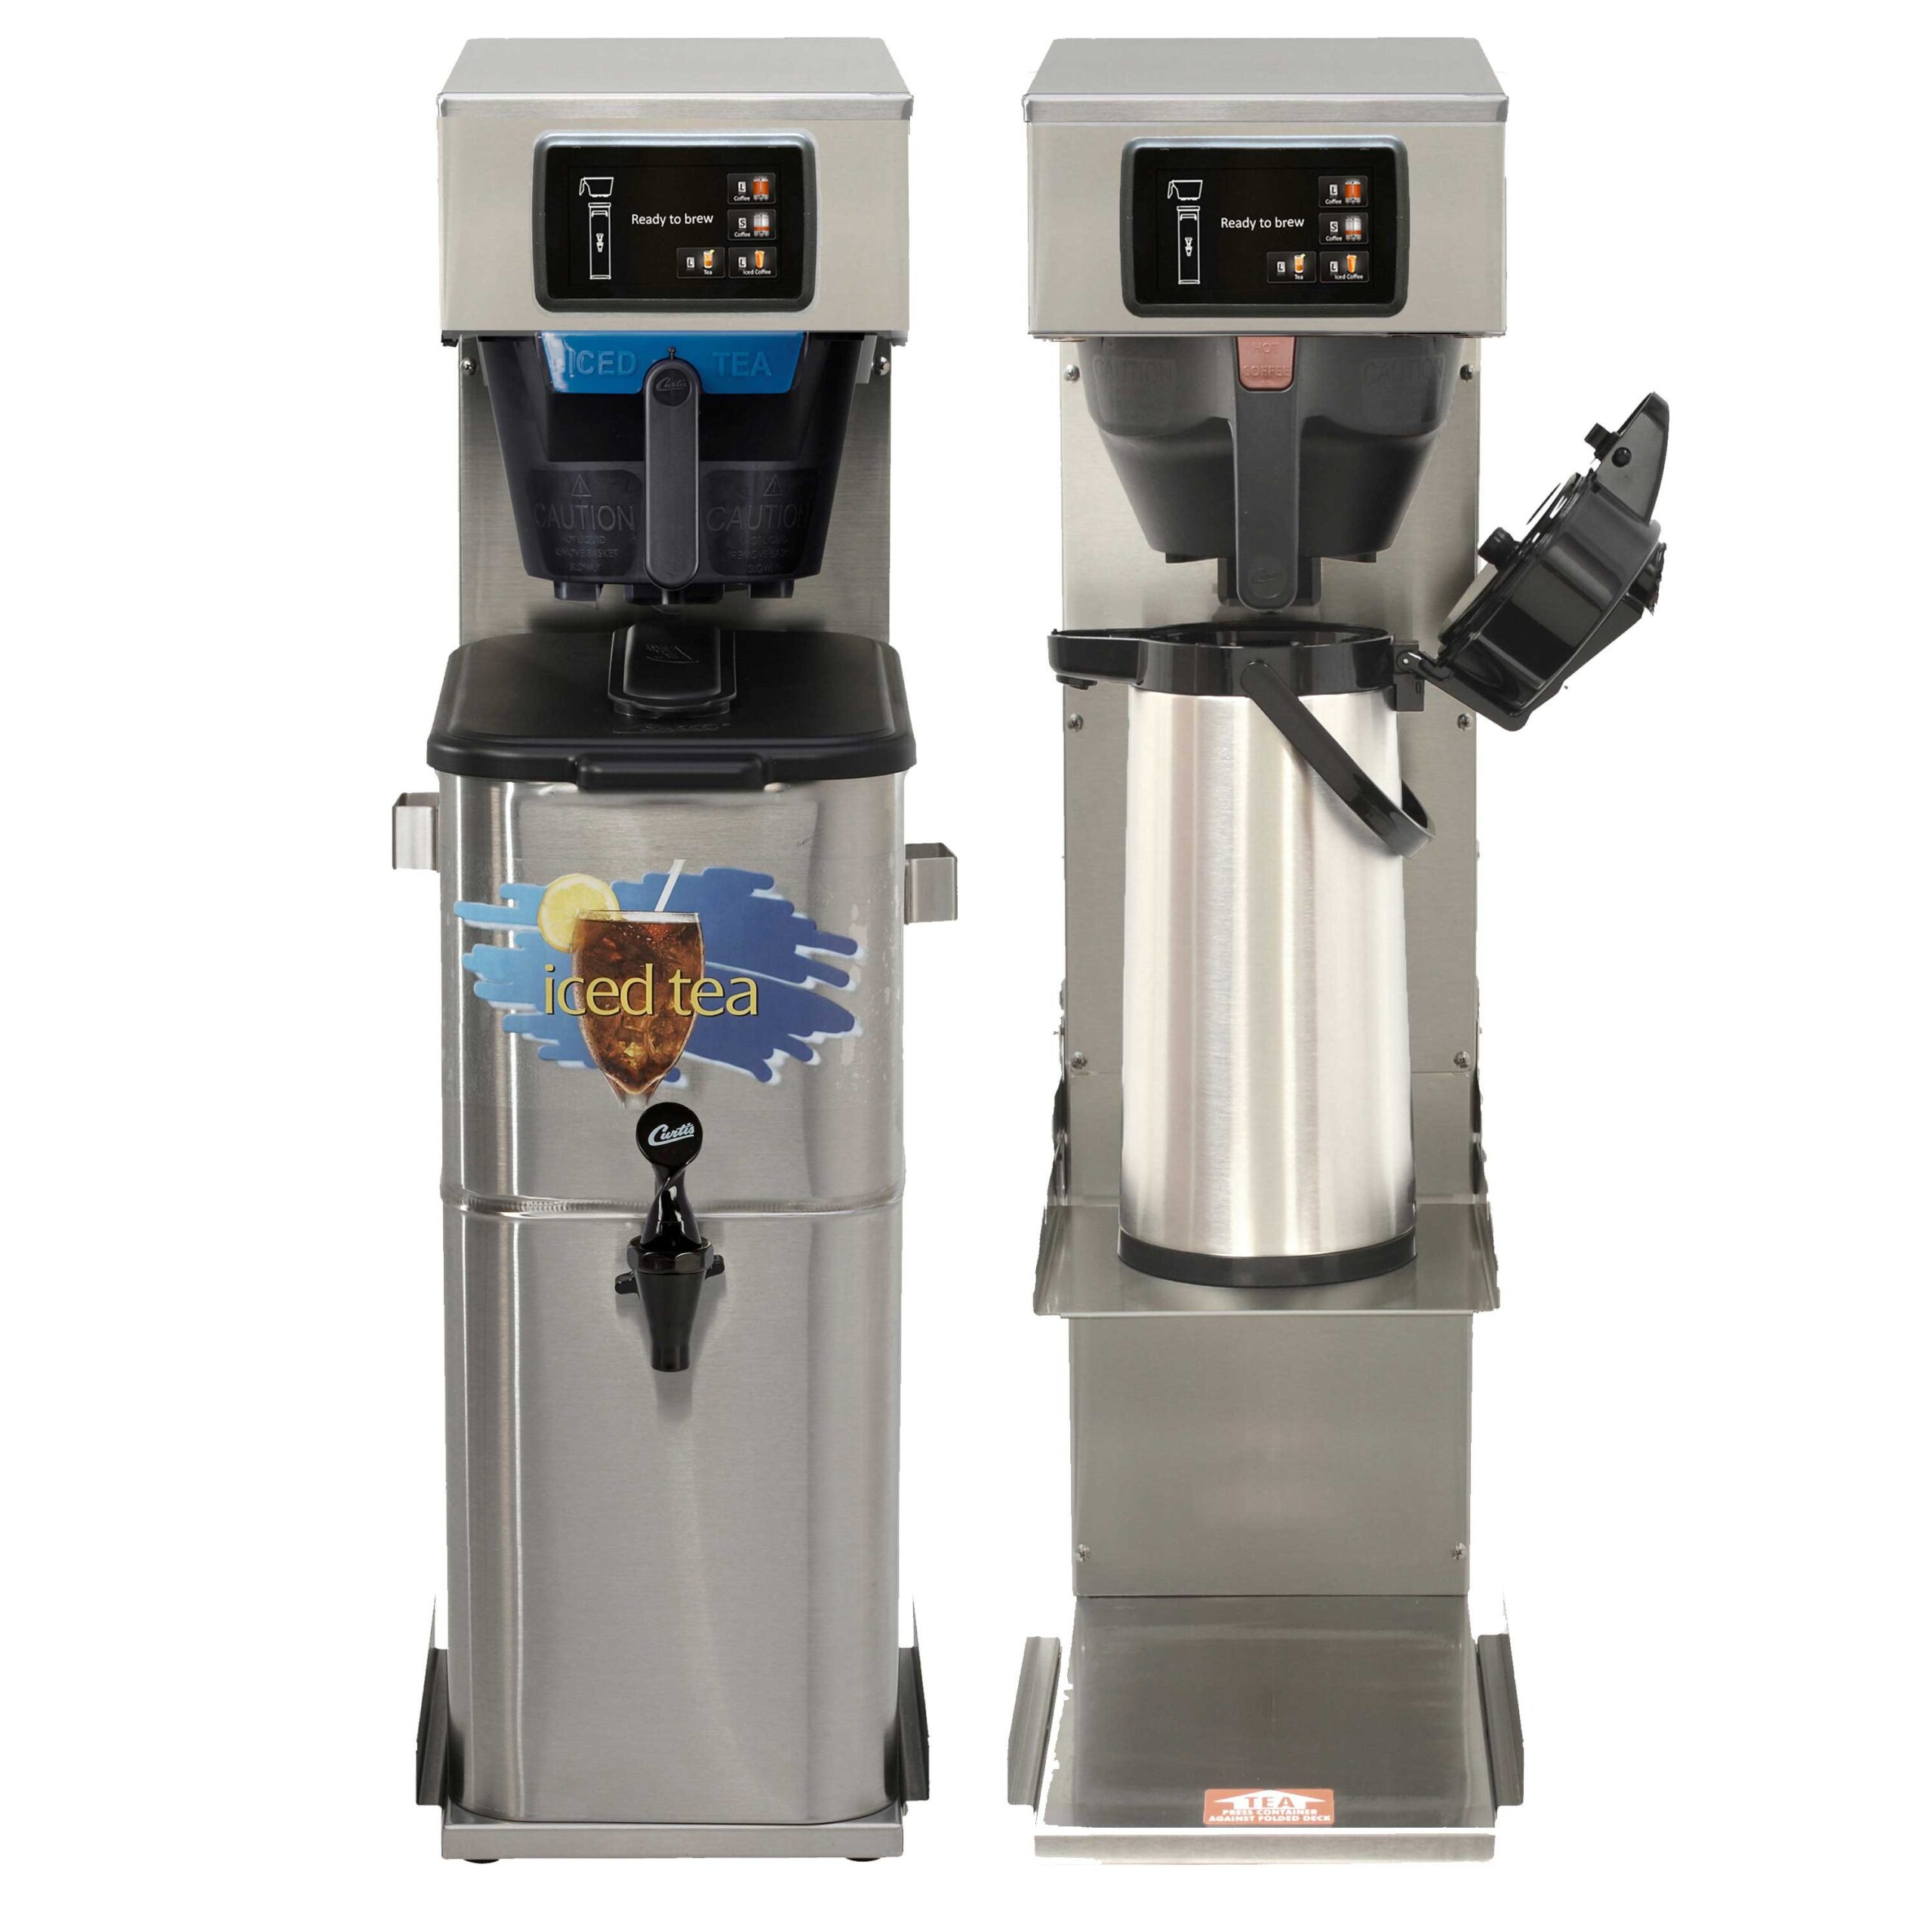 Curtis Combo Polaris Tea/Coffee Brewer Low Profile Products Model: CBP